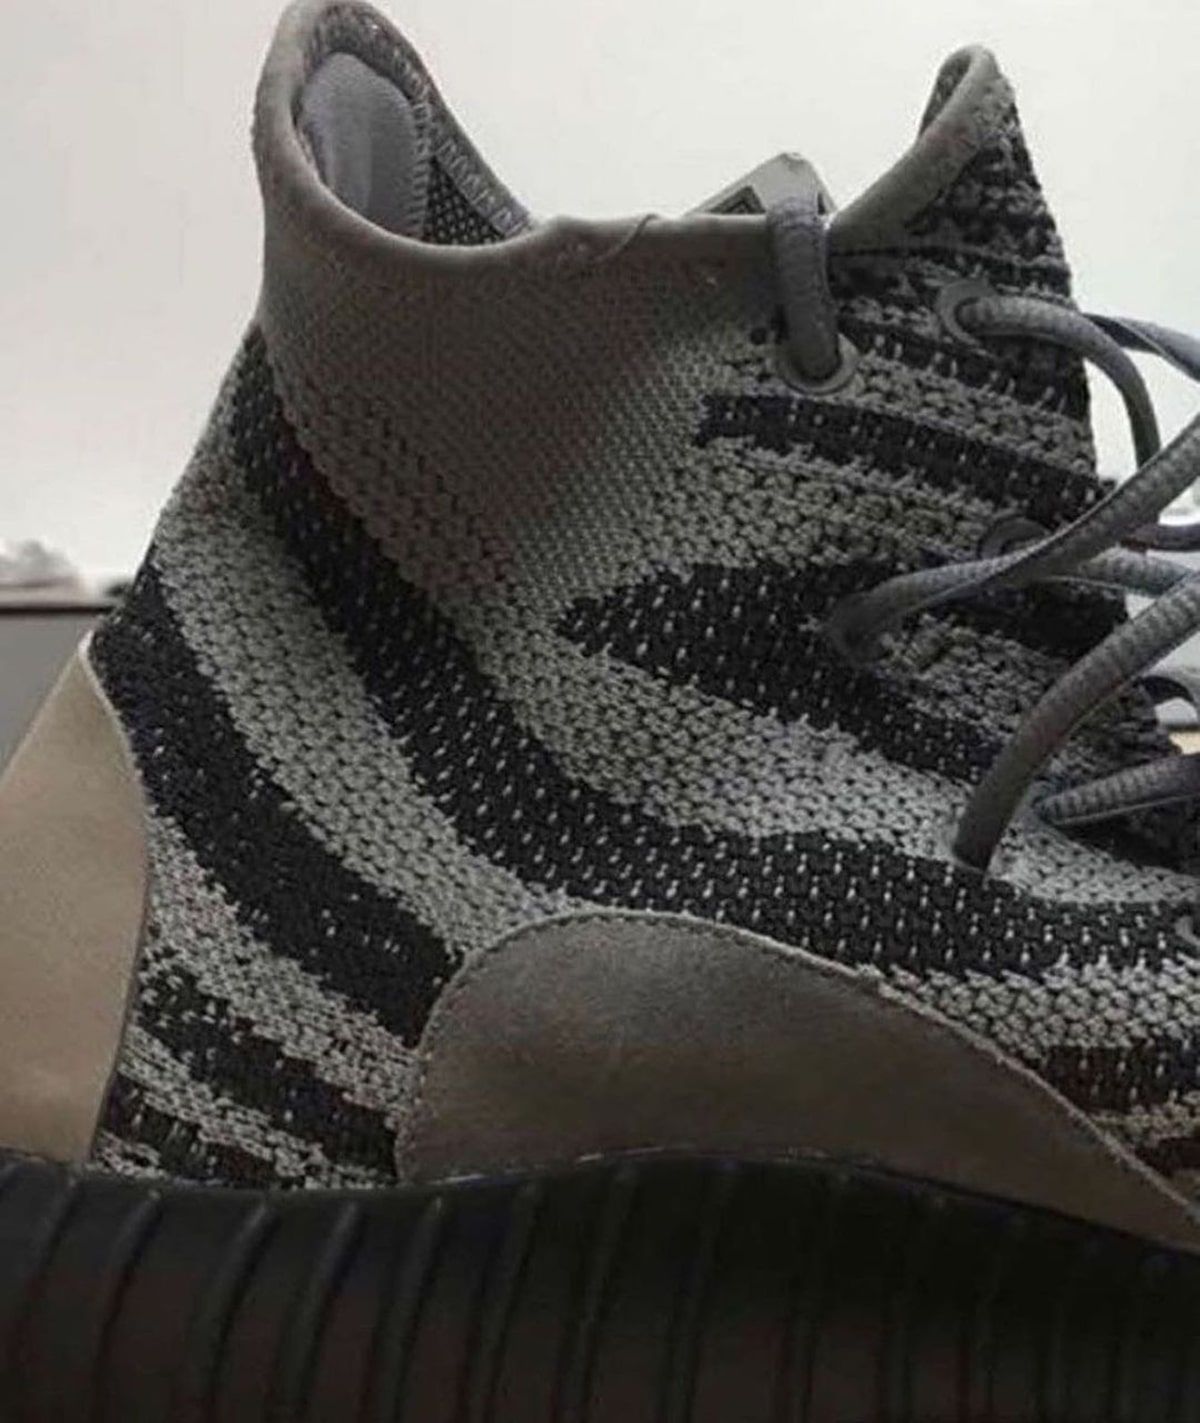 YEEZY 350 Highs on the Way? - HOUSE OF 